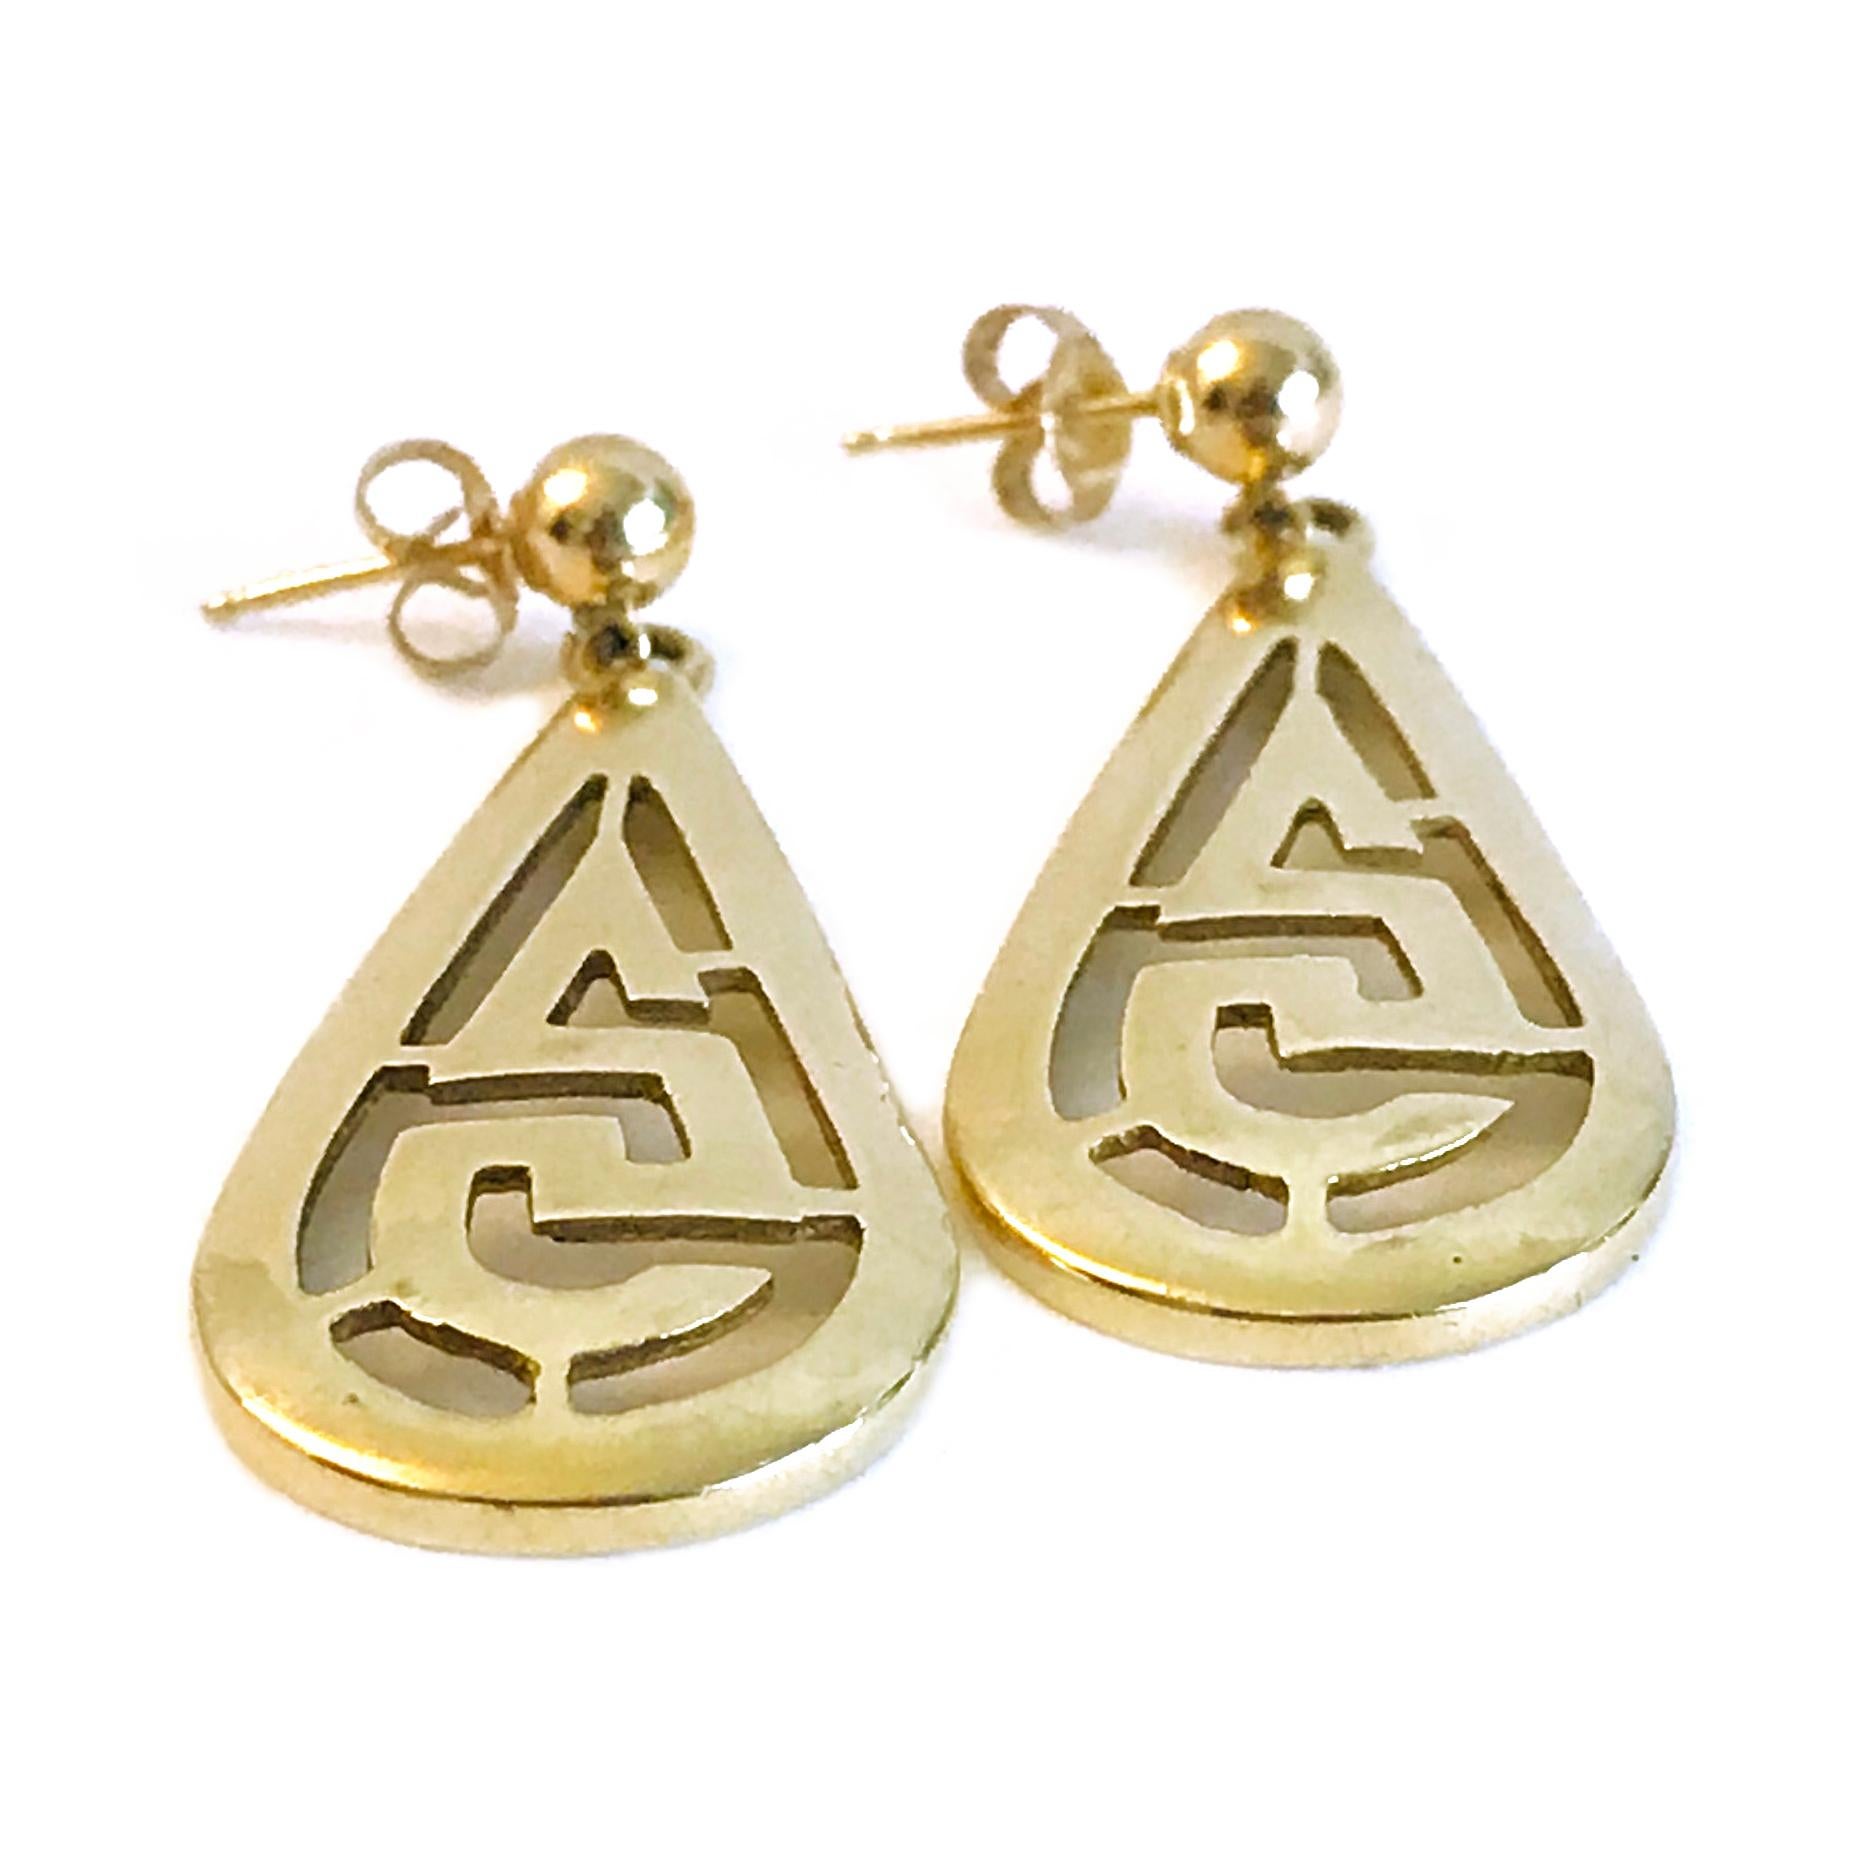 14 Karat Teardrop Earrings. These Greek-inspired earrings contain a gold bead stud with a teardrop. The earrings have a push back and 585 stamped on the back. The earrings measure 41mm high x 17mm wide. The total gold weight of the earrings is 8.36